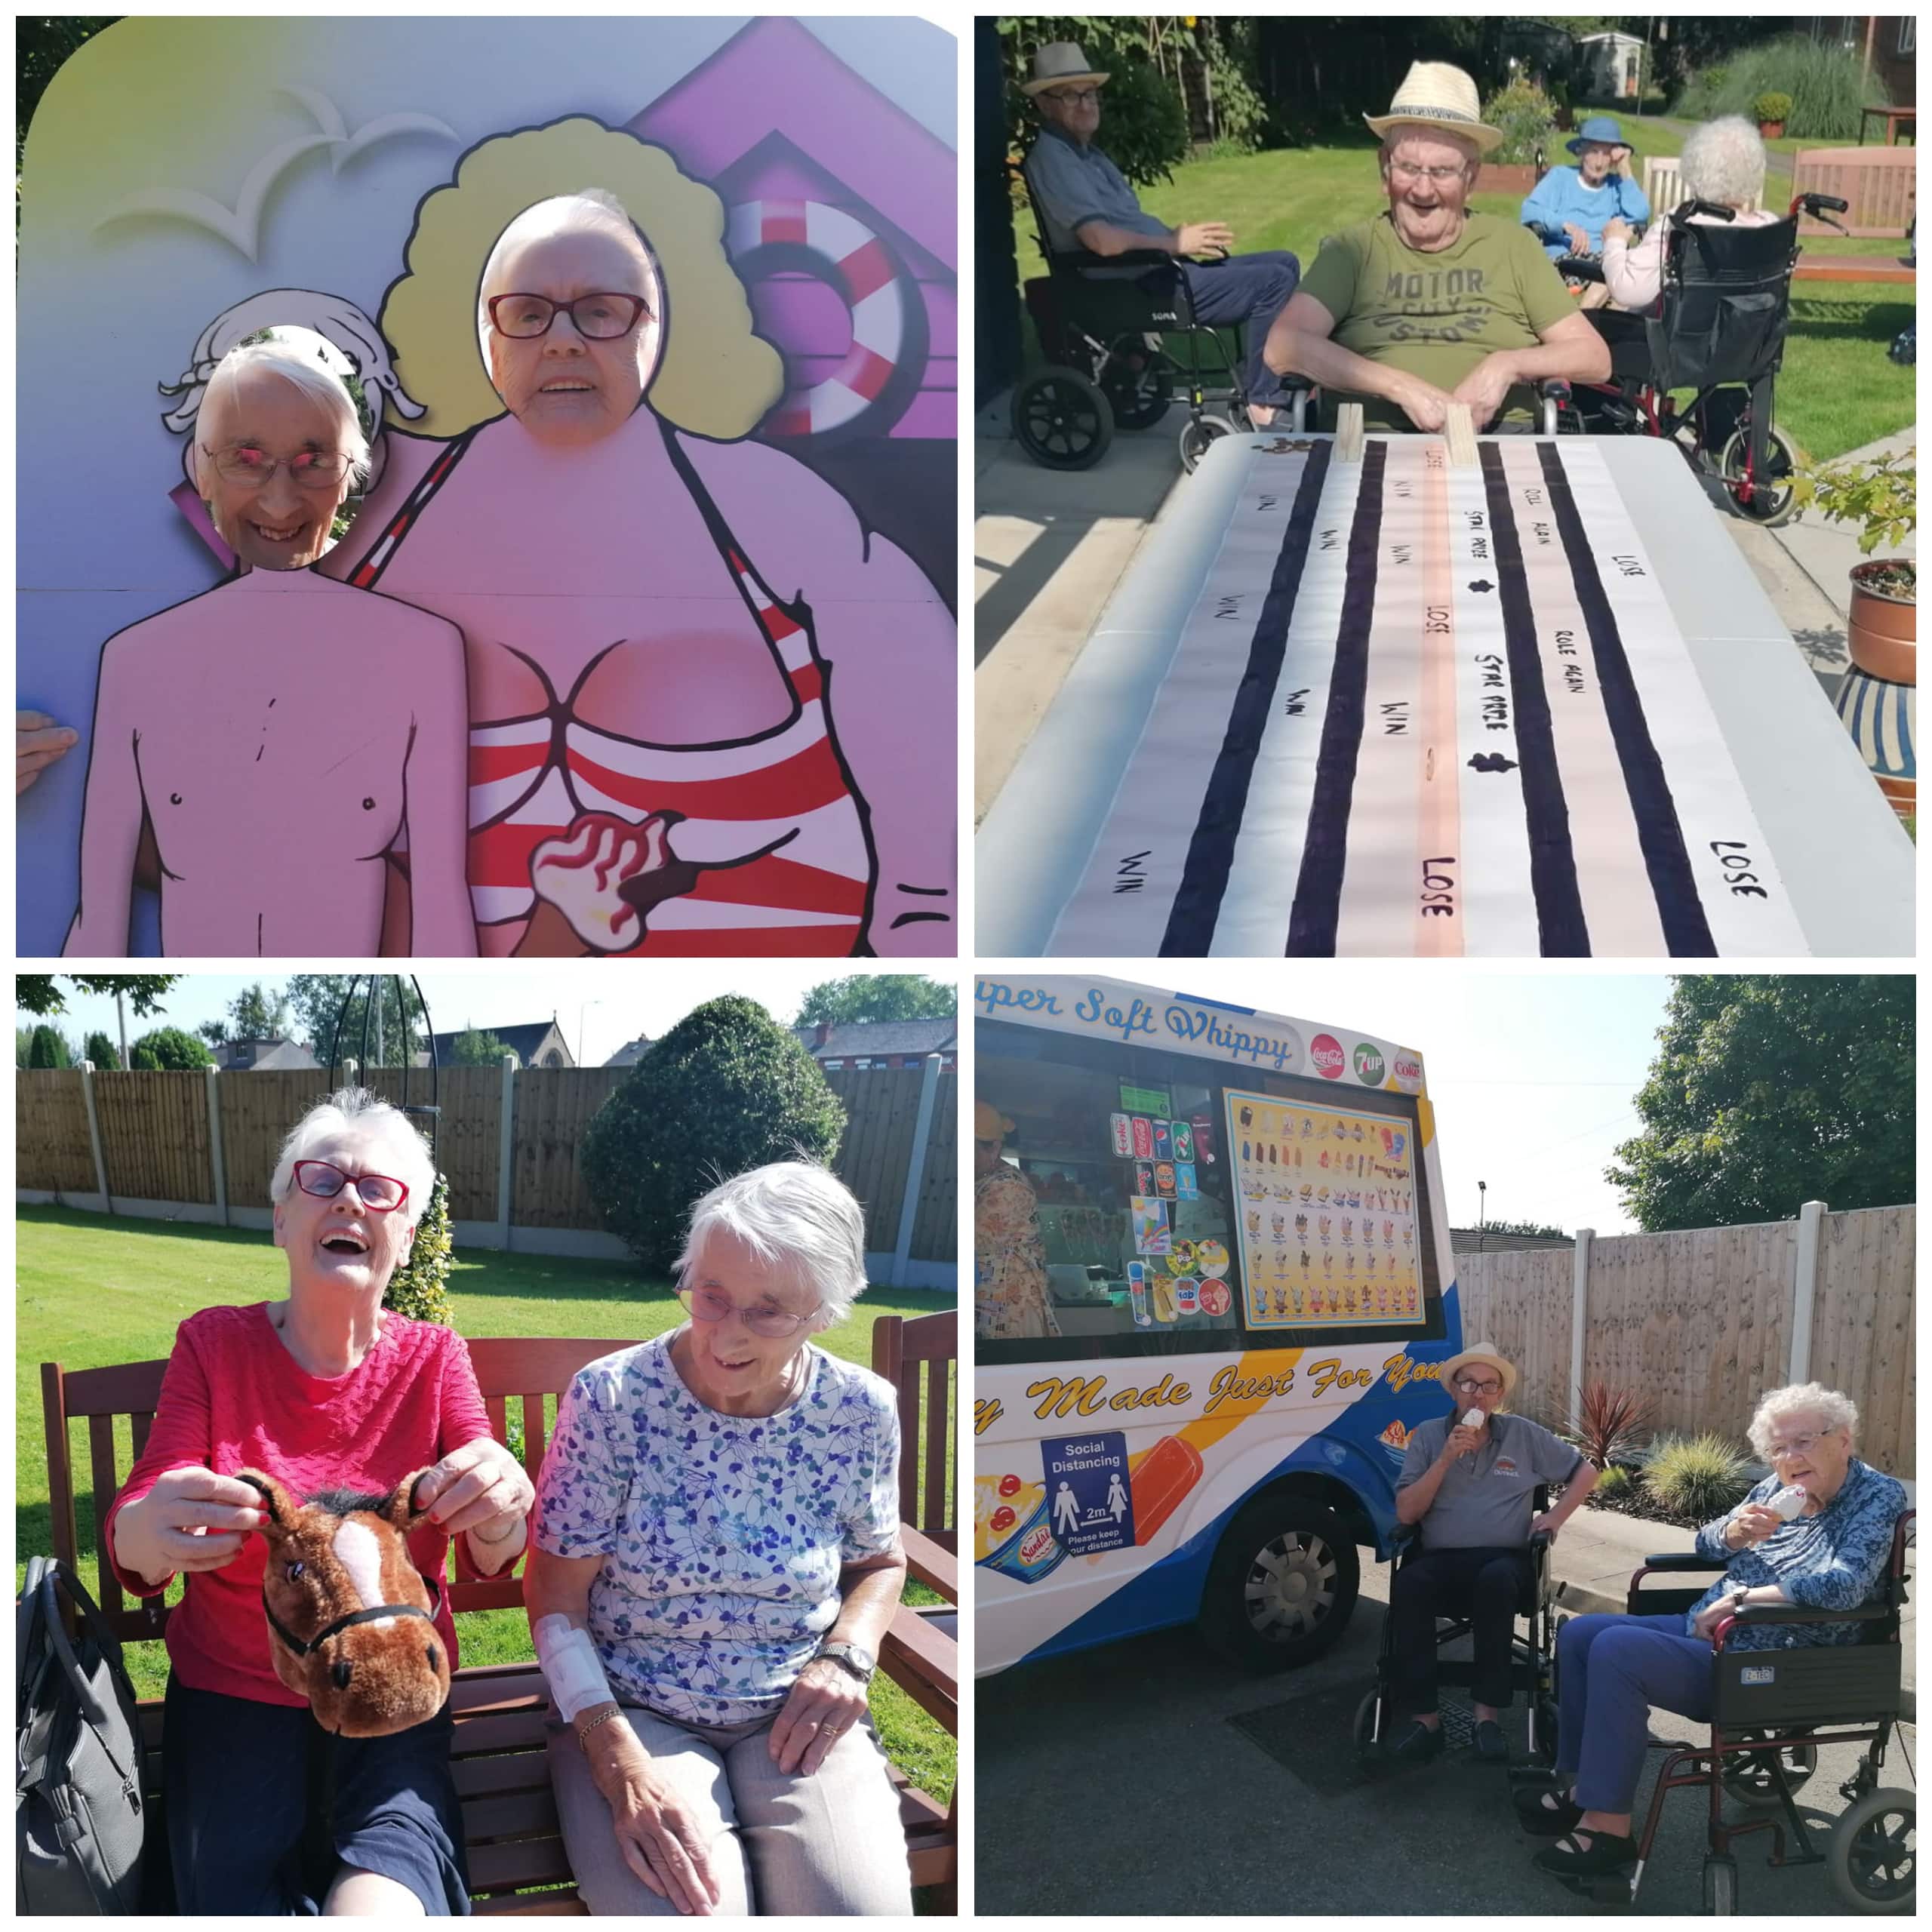 The magic of Blackpool comes to The Chanters Care Home in Atherton with ice cream van, coin pusher games and our own taken on donkey rides!